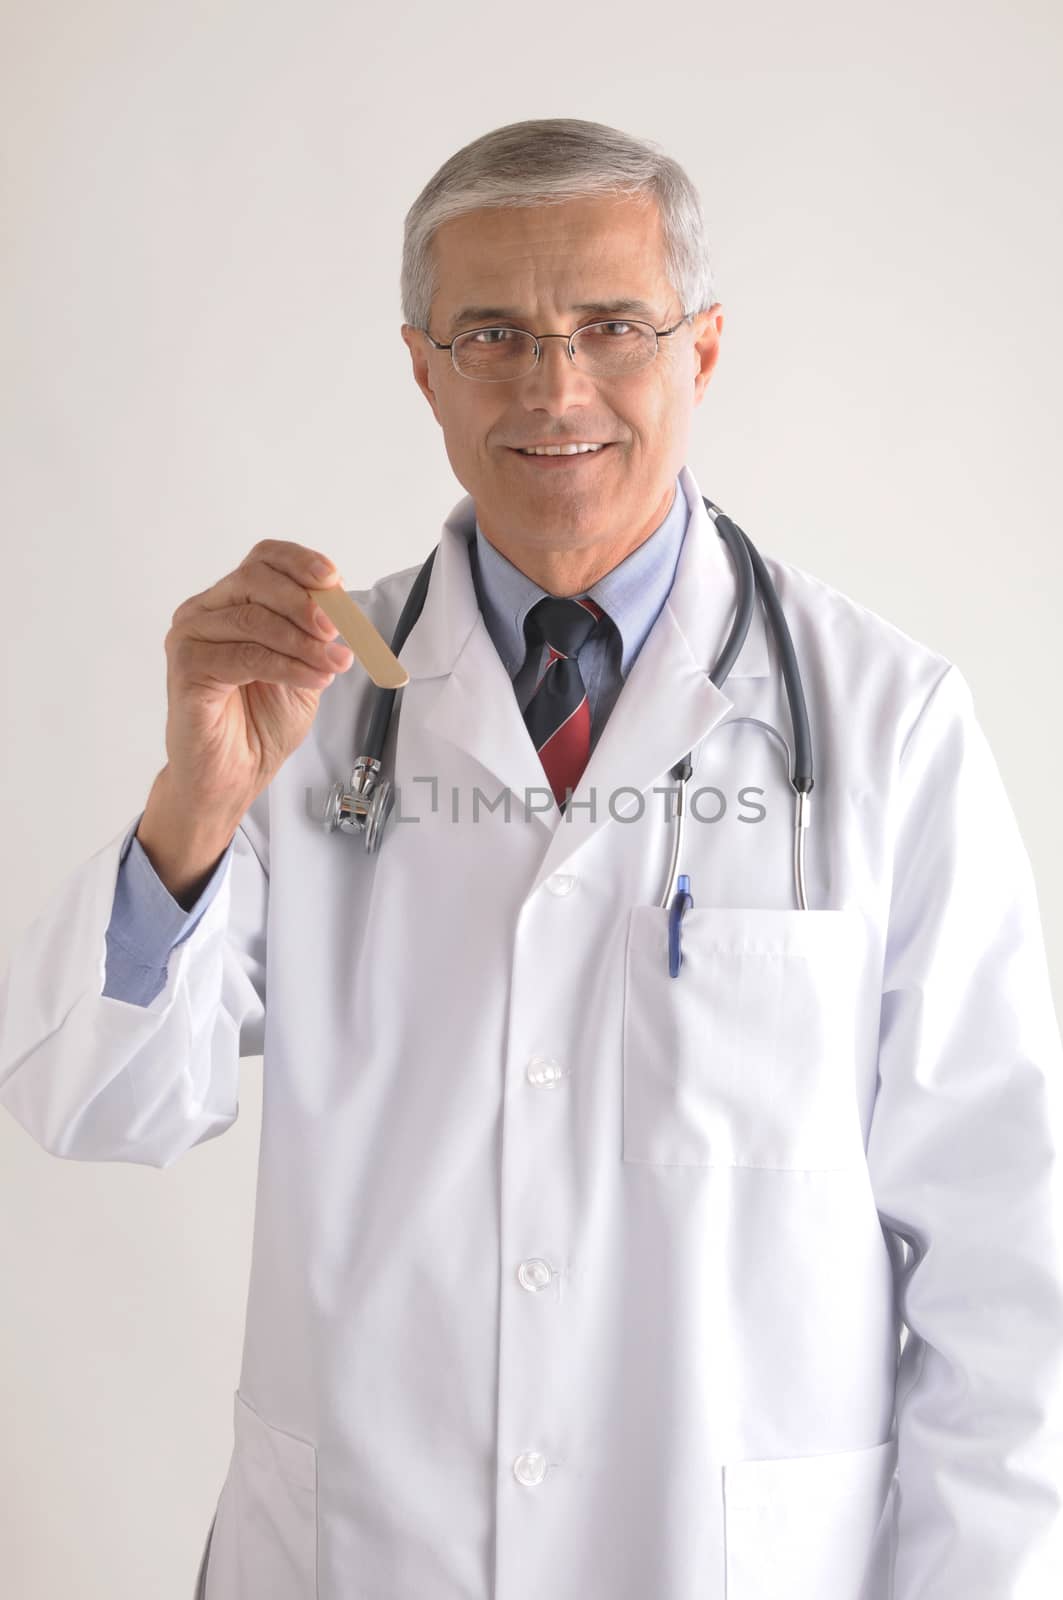 Doctor in Labcoat with Tongue Depressor by sCukrov